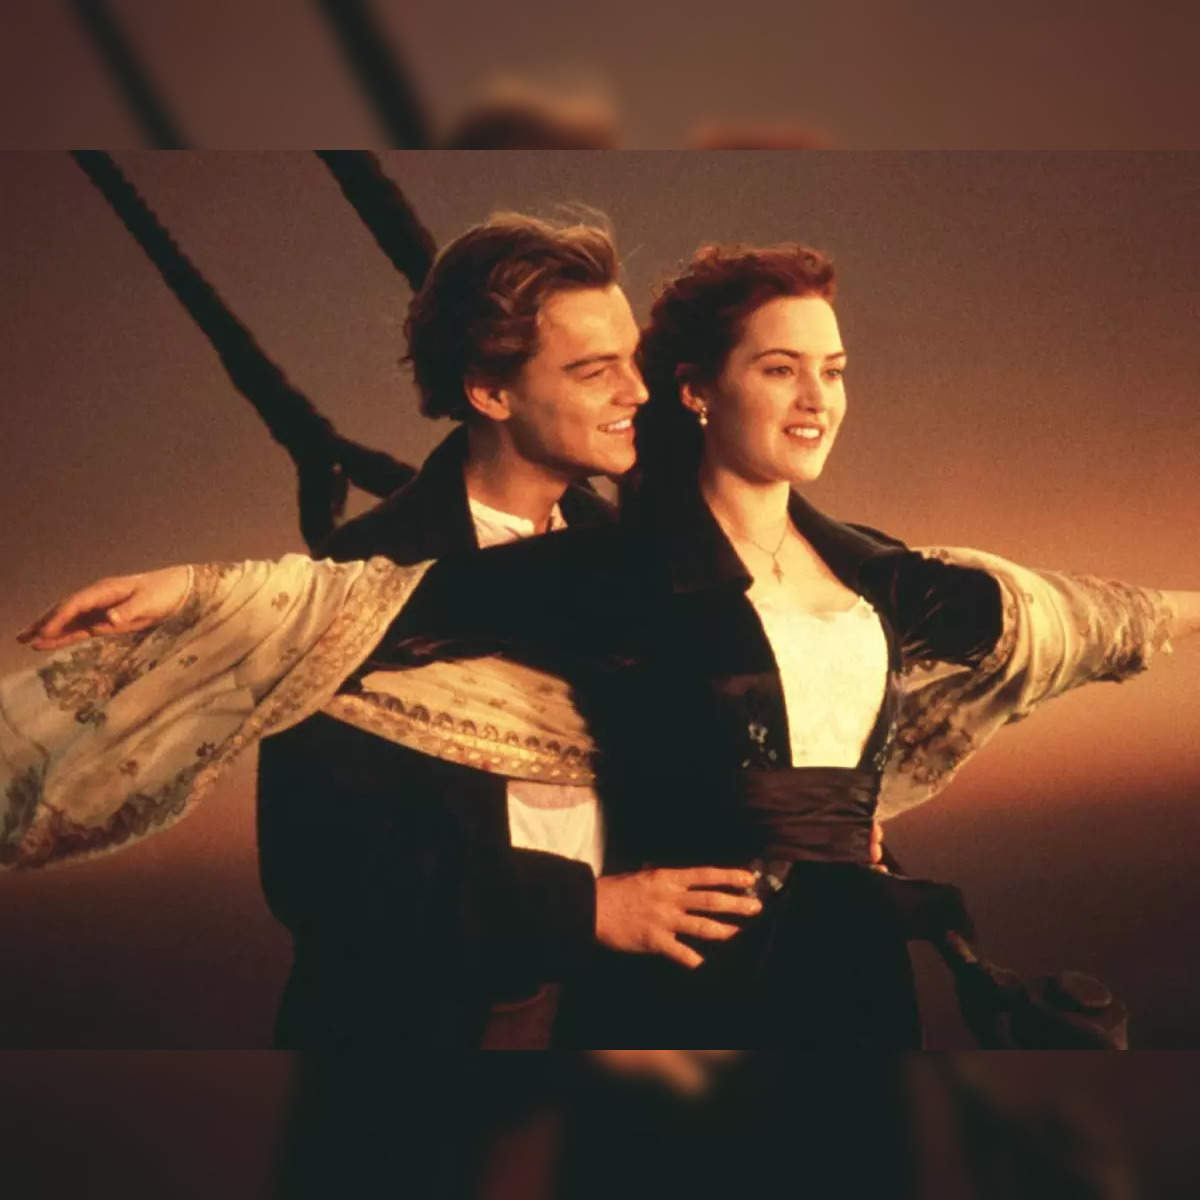 Only one could survive.' James Cameron finally reveals why Rose didn't save  Jack in 'Titanic', gives scientific reason - The Economic Times